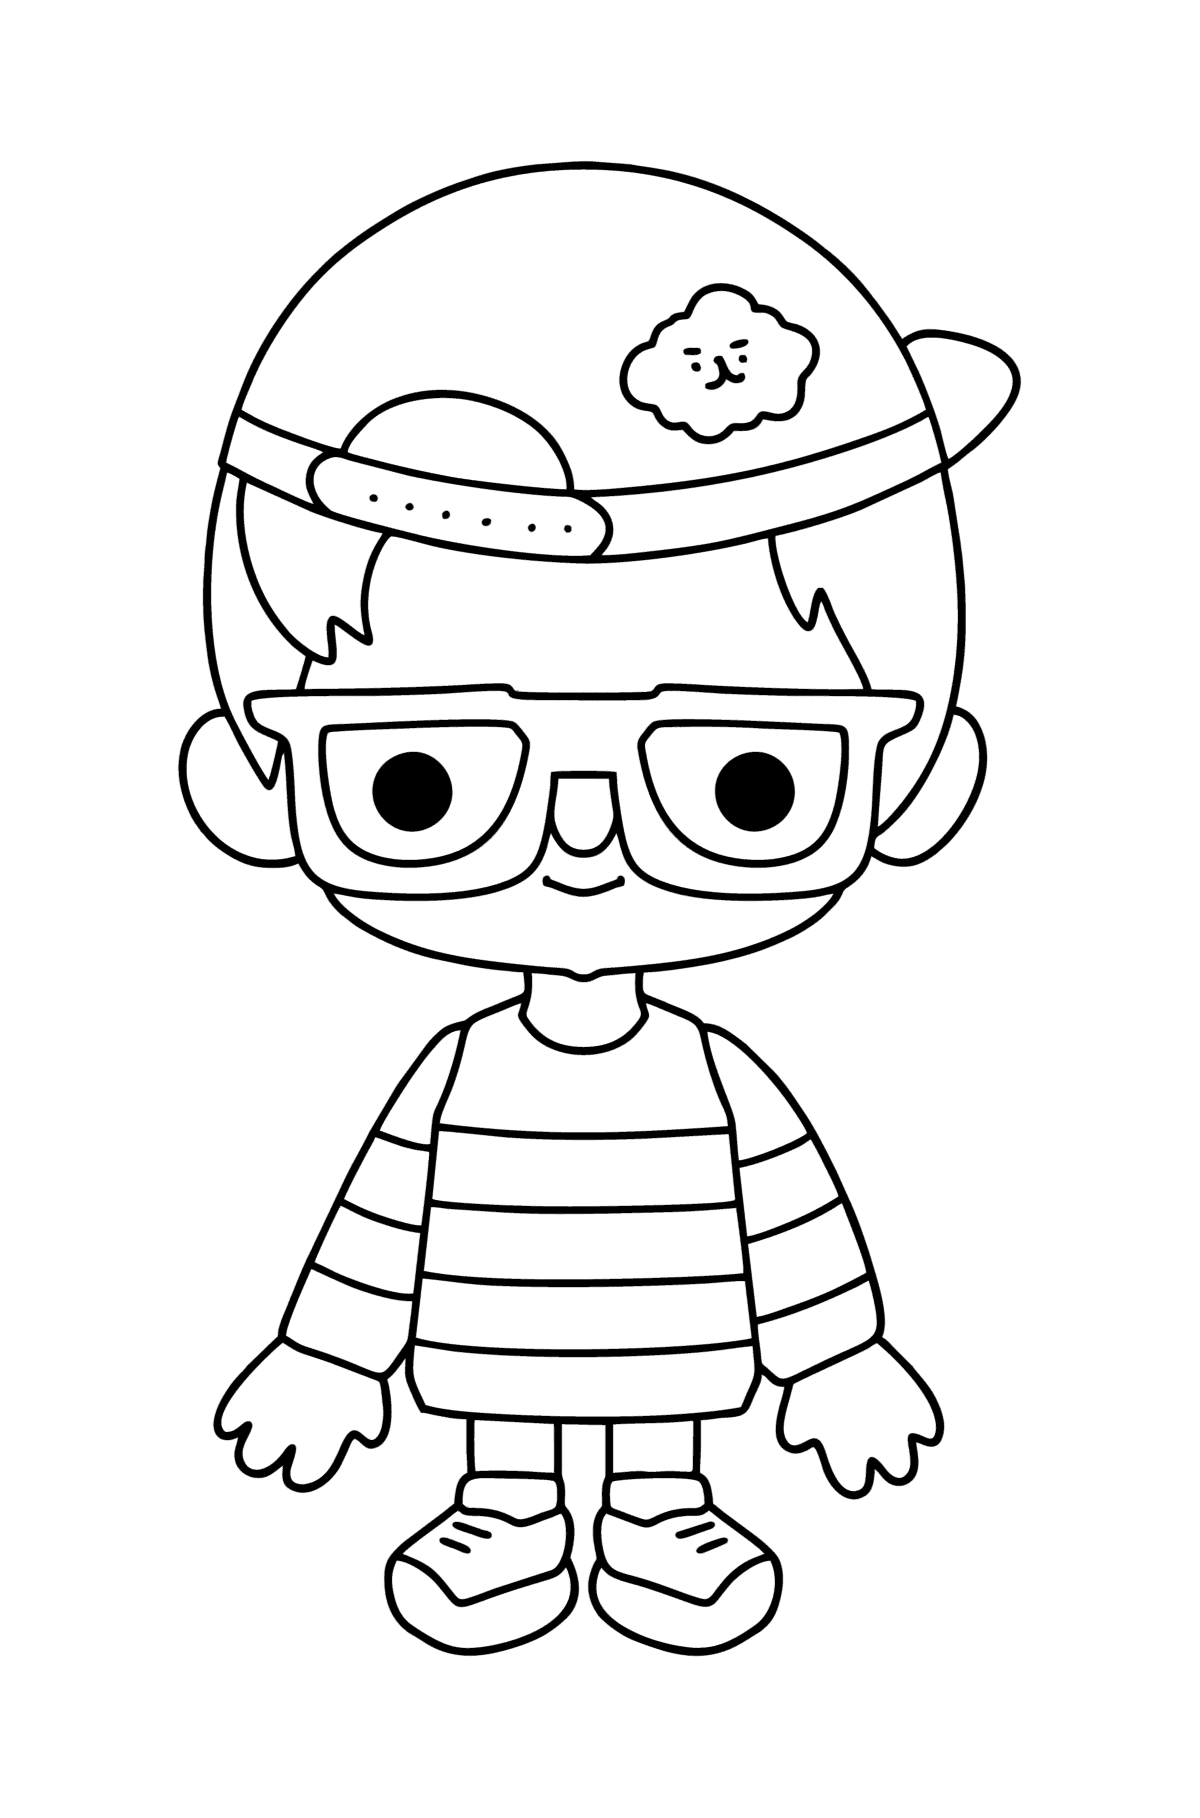 Coloring page Boy tocaboca 03 - Coloring Pages for Kids